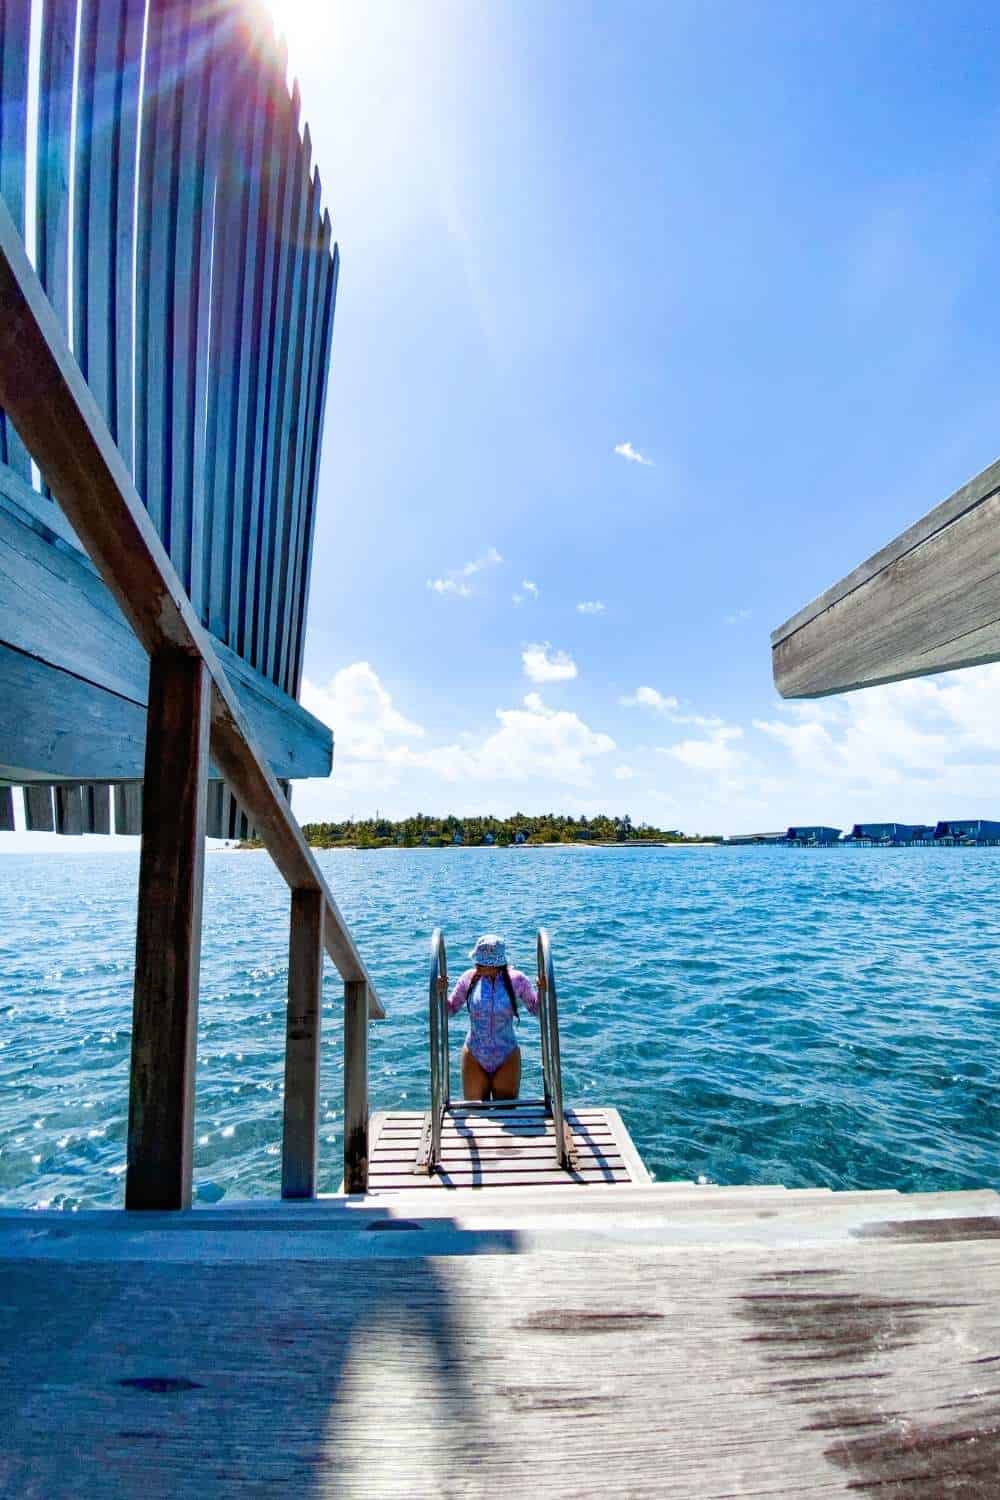 Work with me, Overwater bungalow entrance to ocean at St Regis Maldives Island